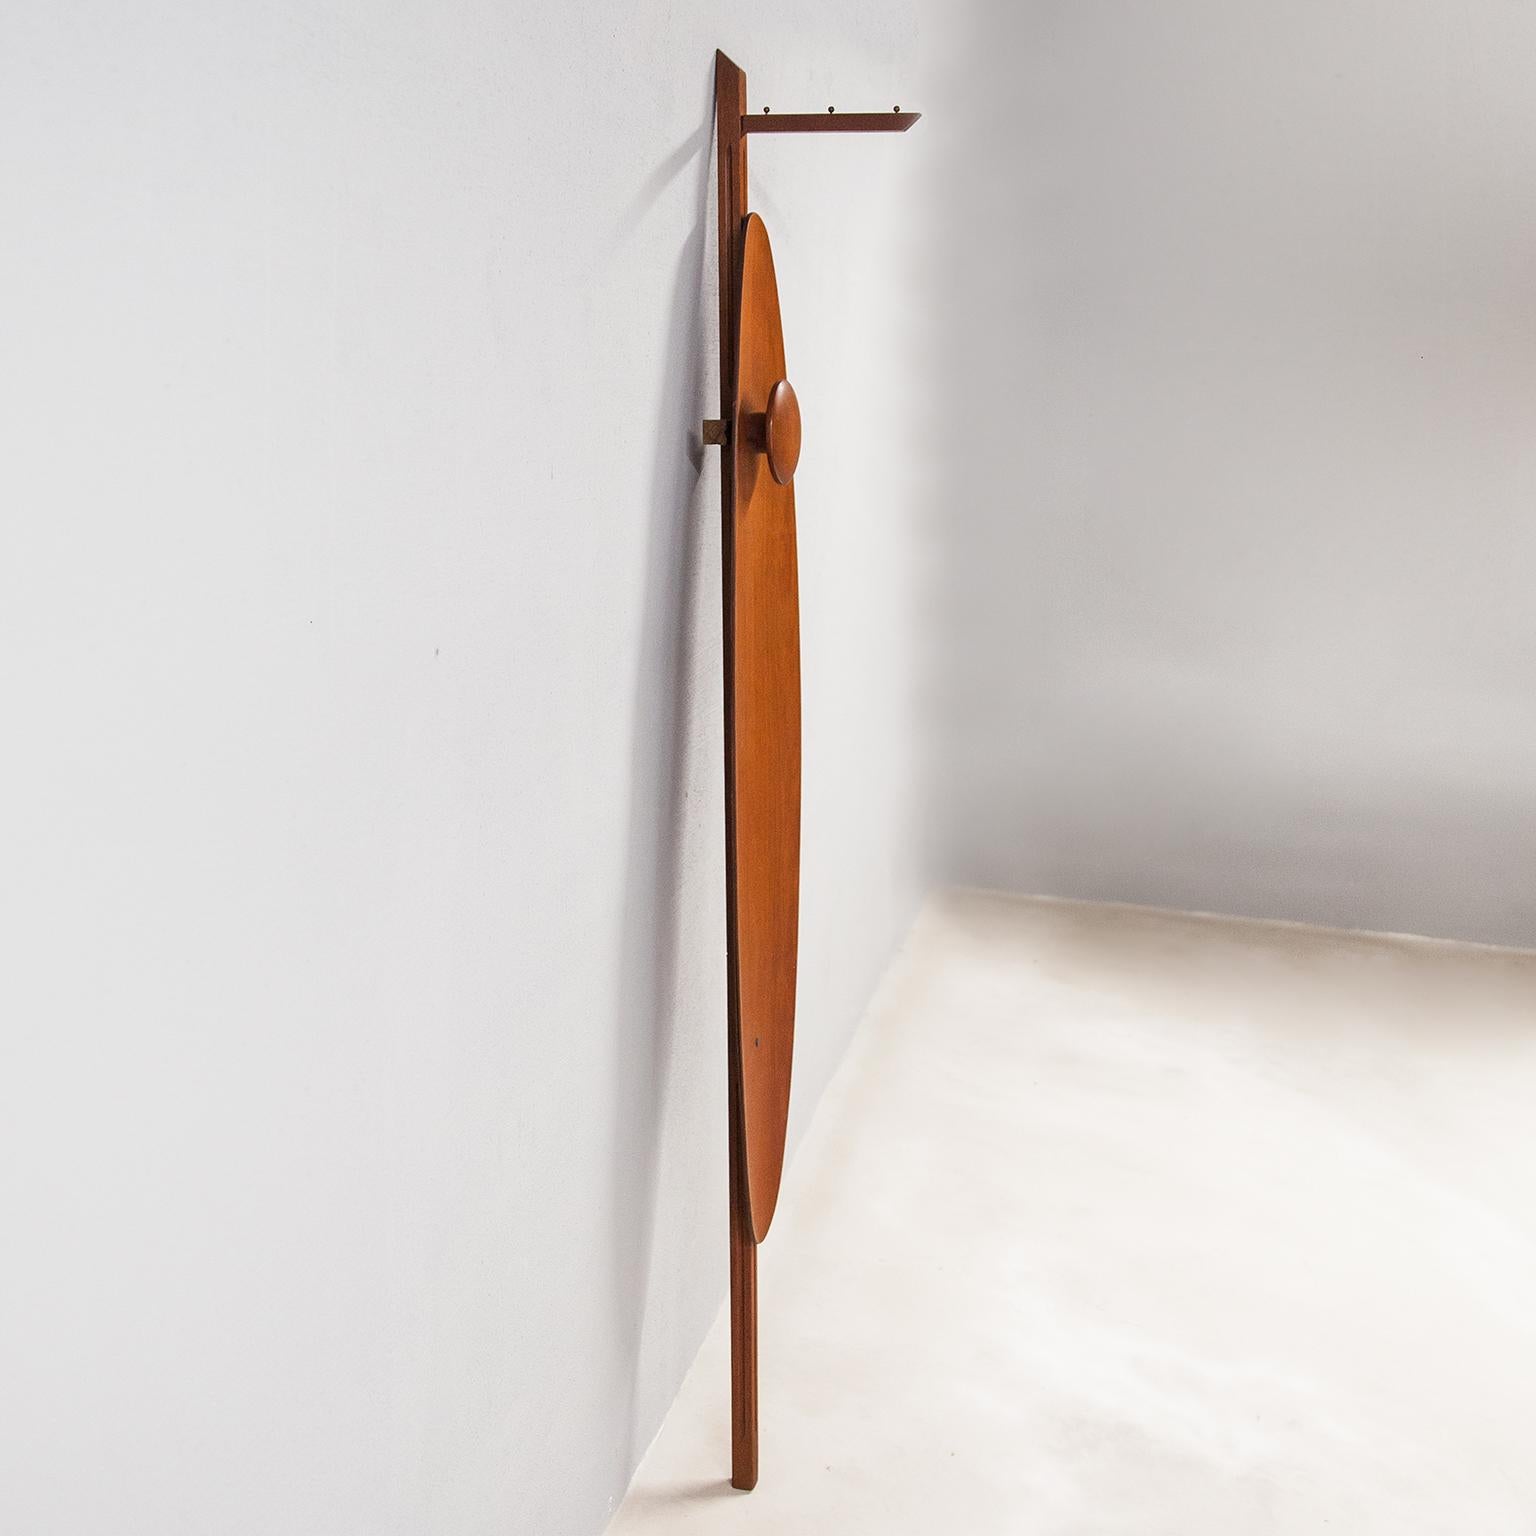 Elegant sculpture of a single coat stand hanger in teak attributed to Carlo Graffi Italy 1950s and in excellent vintage condition.